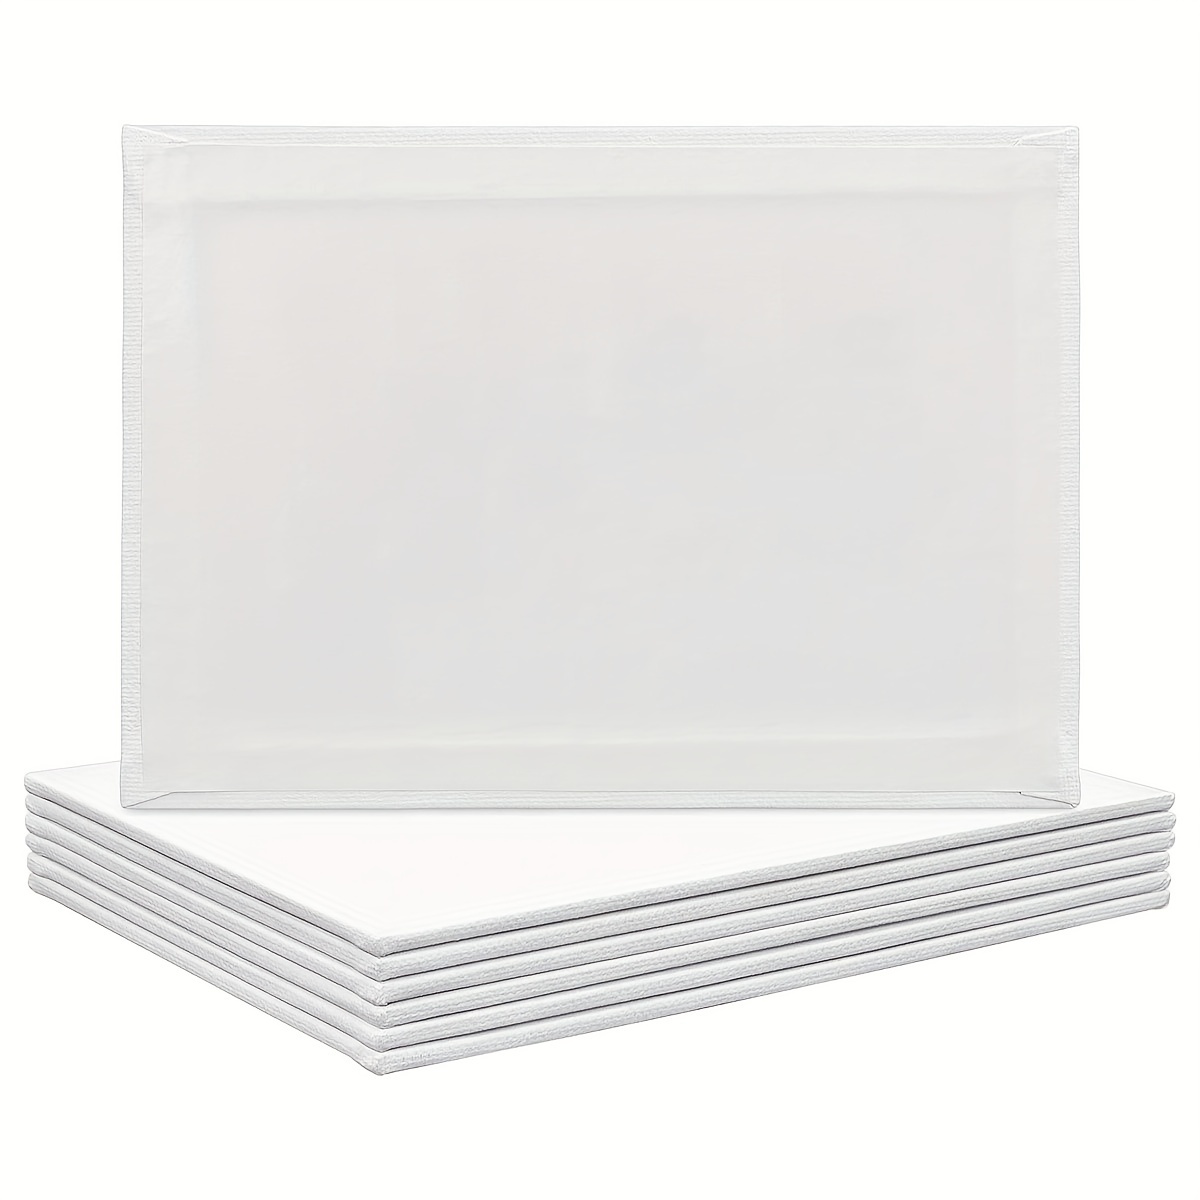 Painting Canvas Panels 8x10 Inch,(20×25 CM) Pack Of 1, Acid Free Canvases  For Painting, White Blank Flat Canvas Boards For Acrylic, Oil, Watercolor 